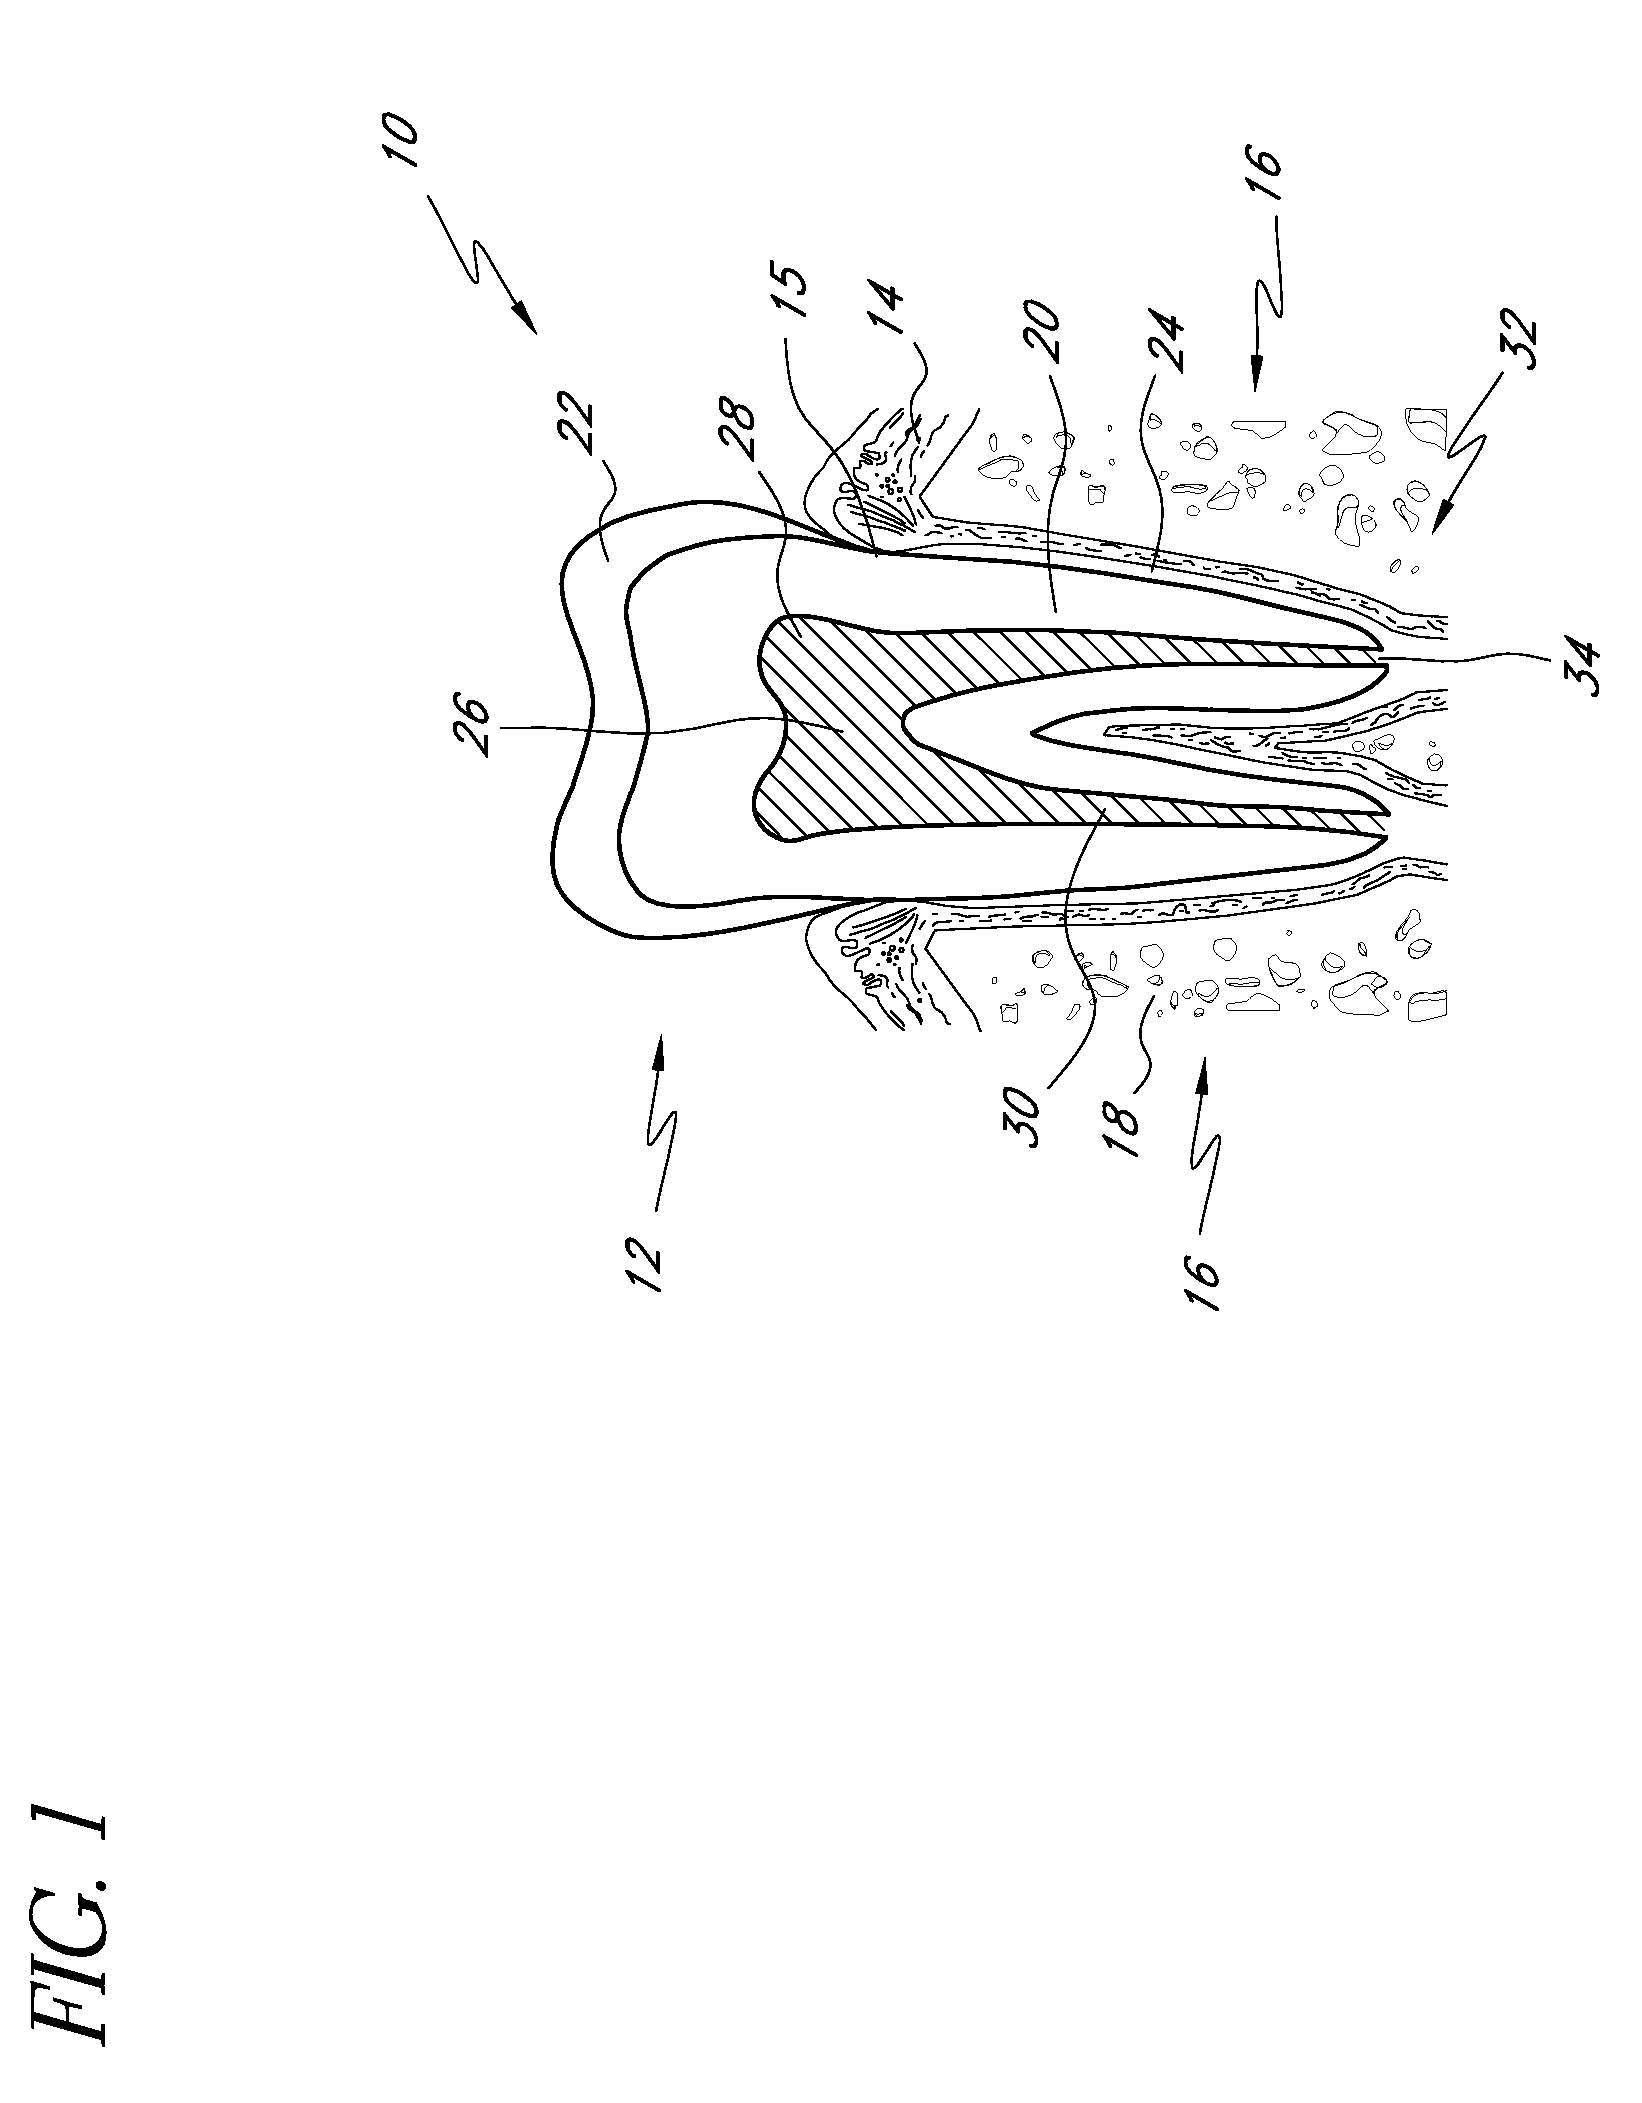 Apparatus and methods for treating root canals of teeth